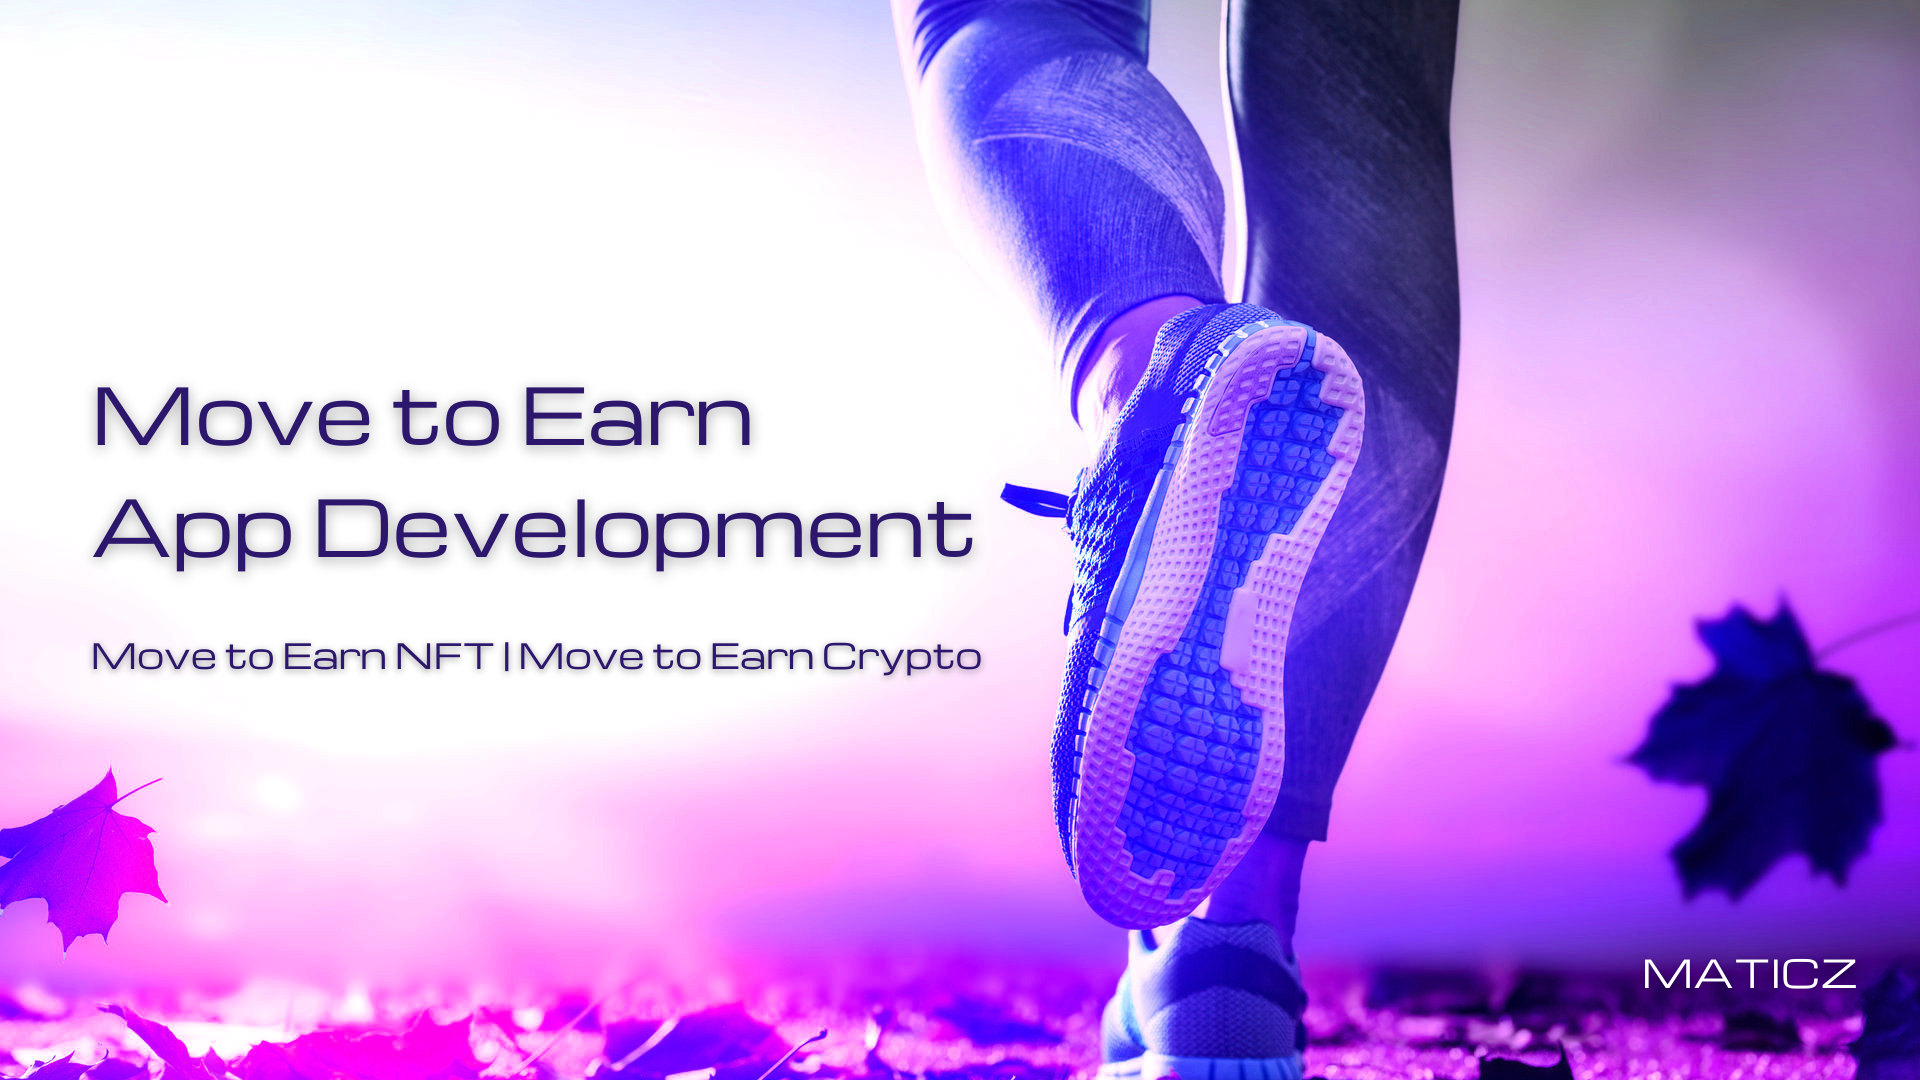 Move to Earn App Development | Move to Earn NFT, Crypto, Tokens